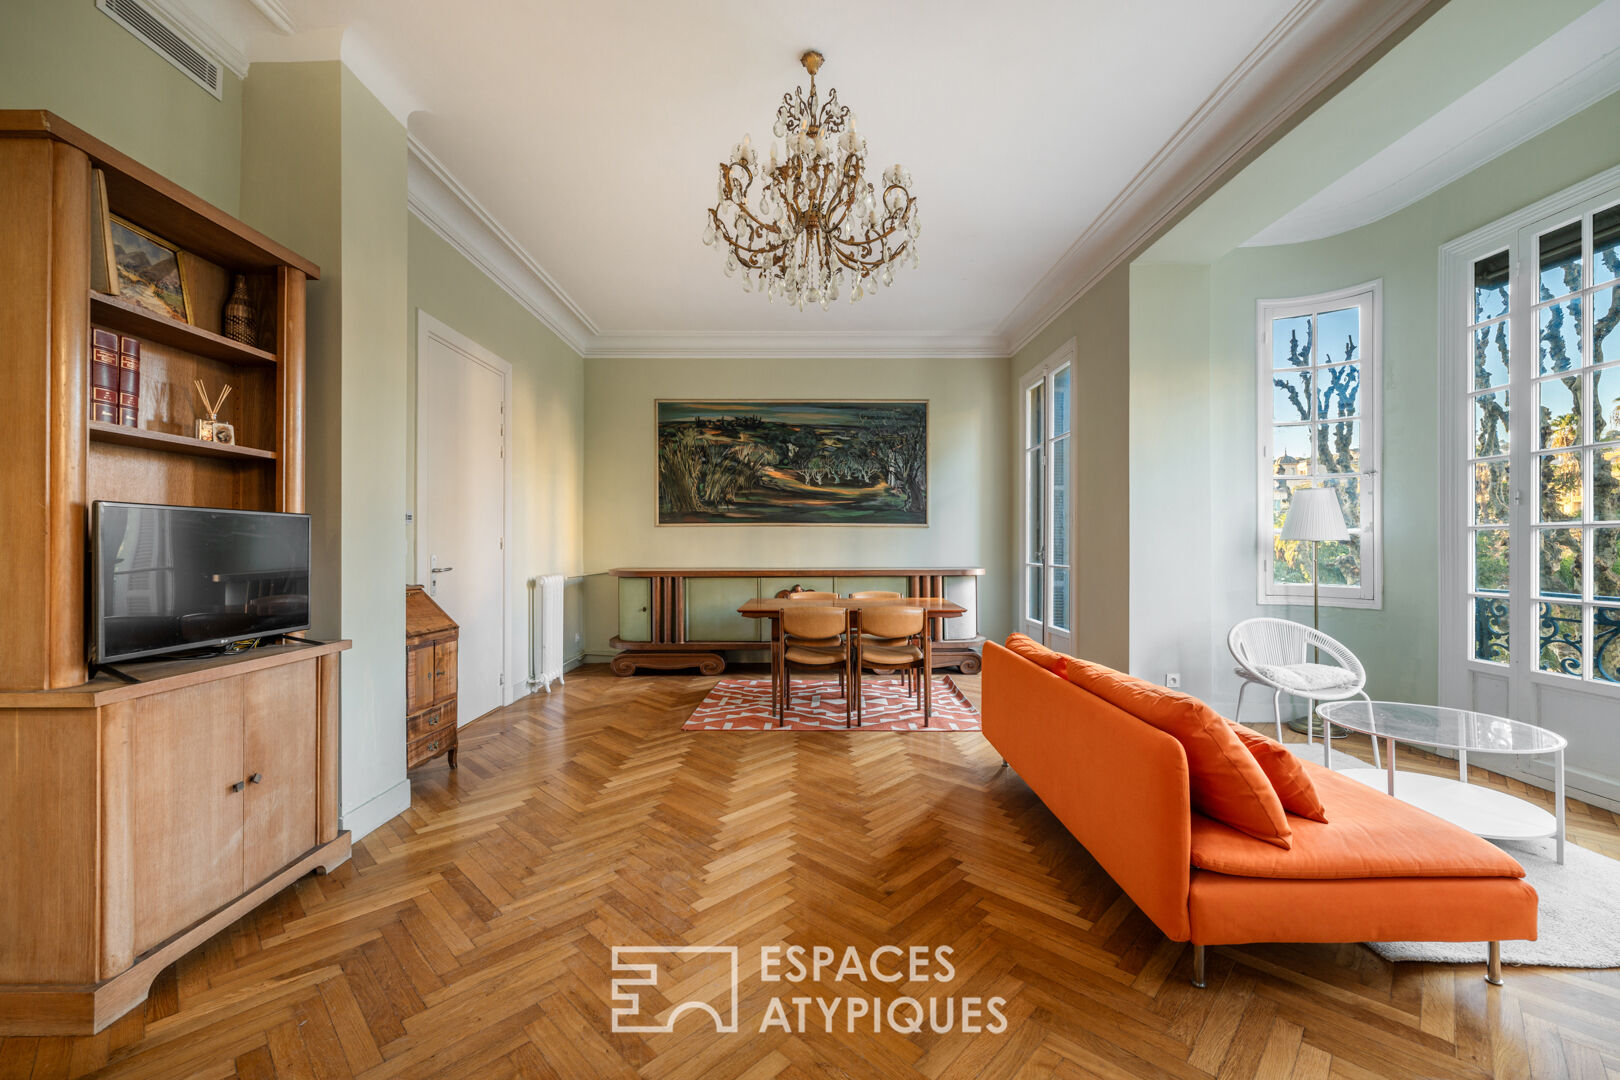 Bourgeois apartment in the heart of the Carré d’or with independent studio